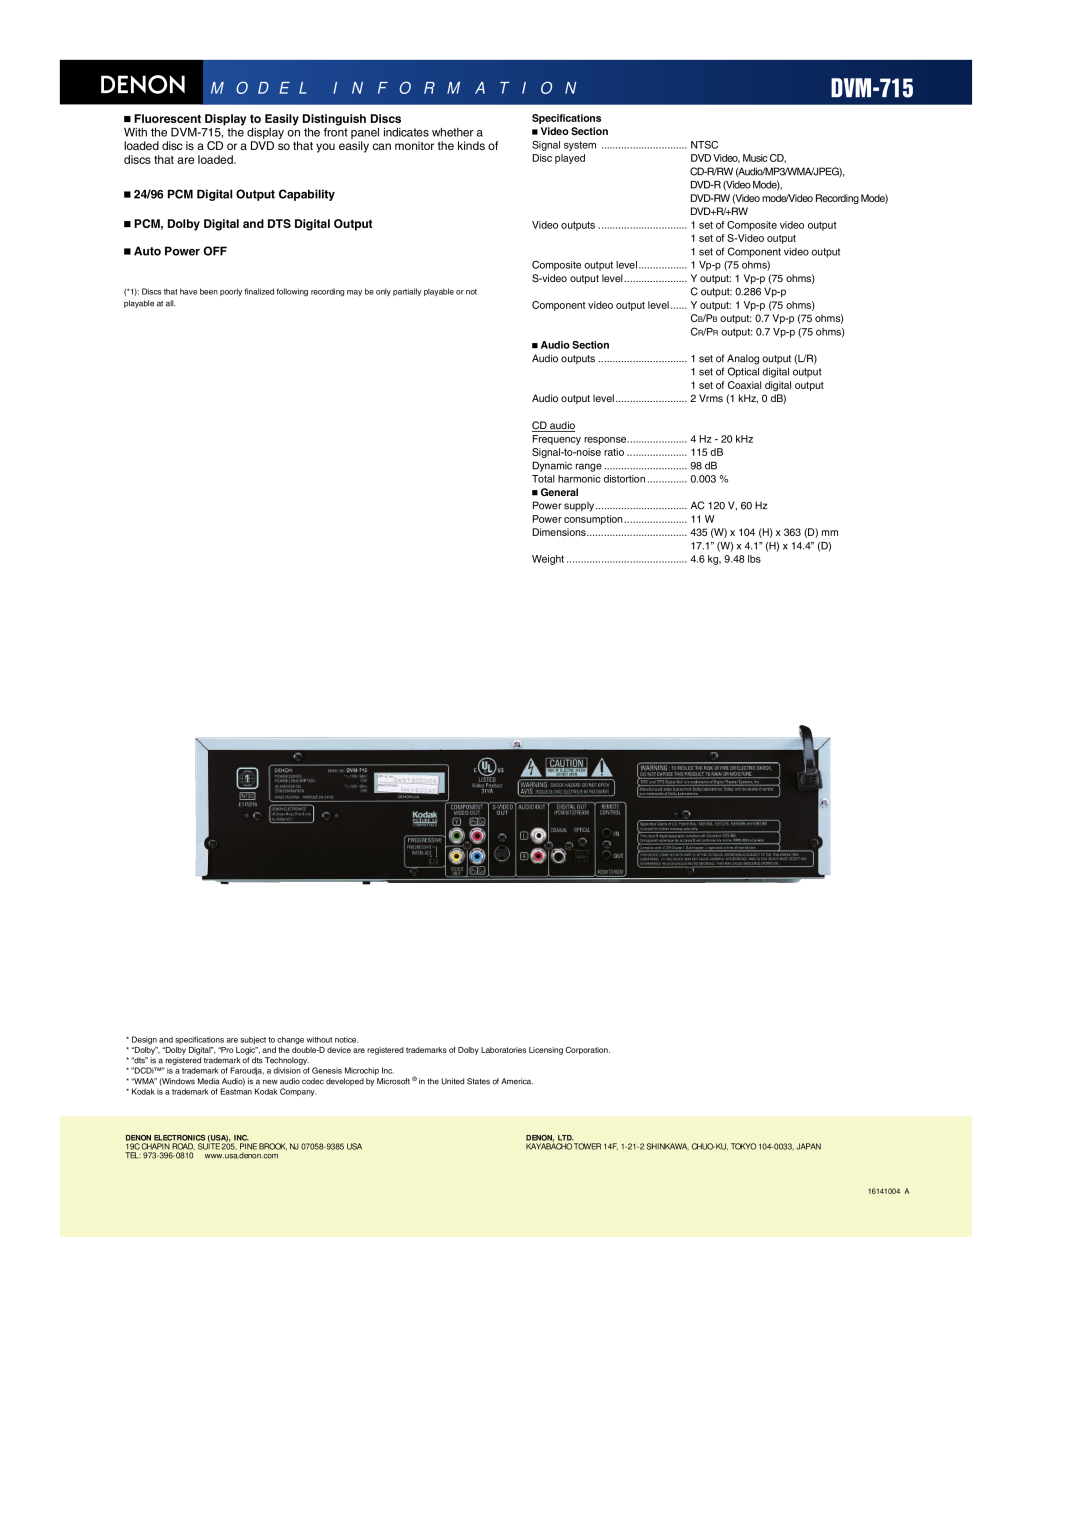 Denon DVM-715S manual M O D E L I N F O R M A T I O N, Specifications, Video Section, Audio Section, General 